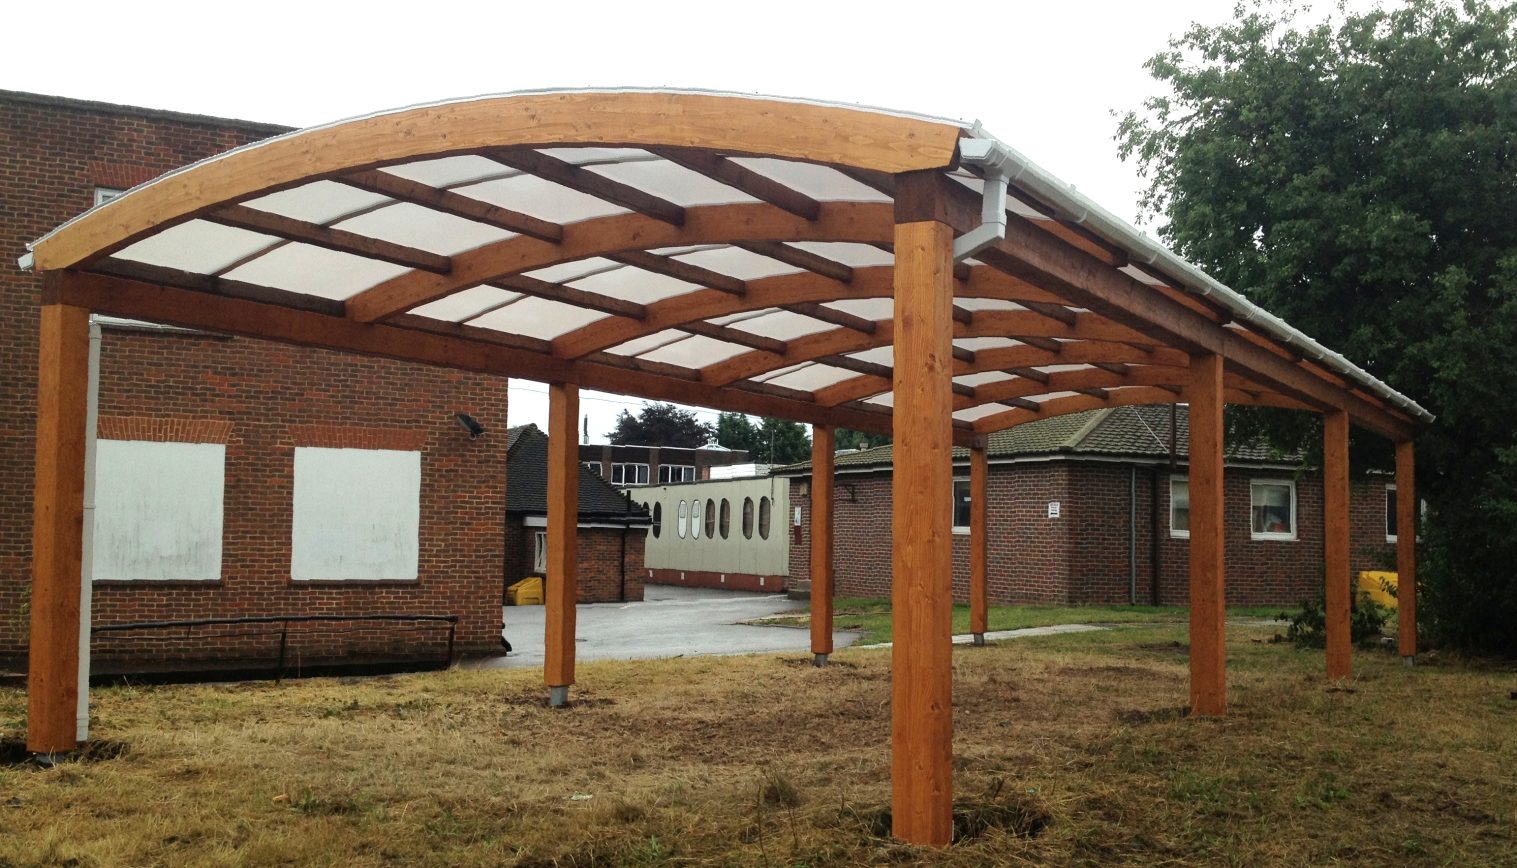 Carshalton High School for Girls – Second Timber Canopy